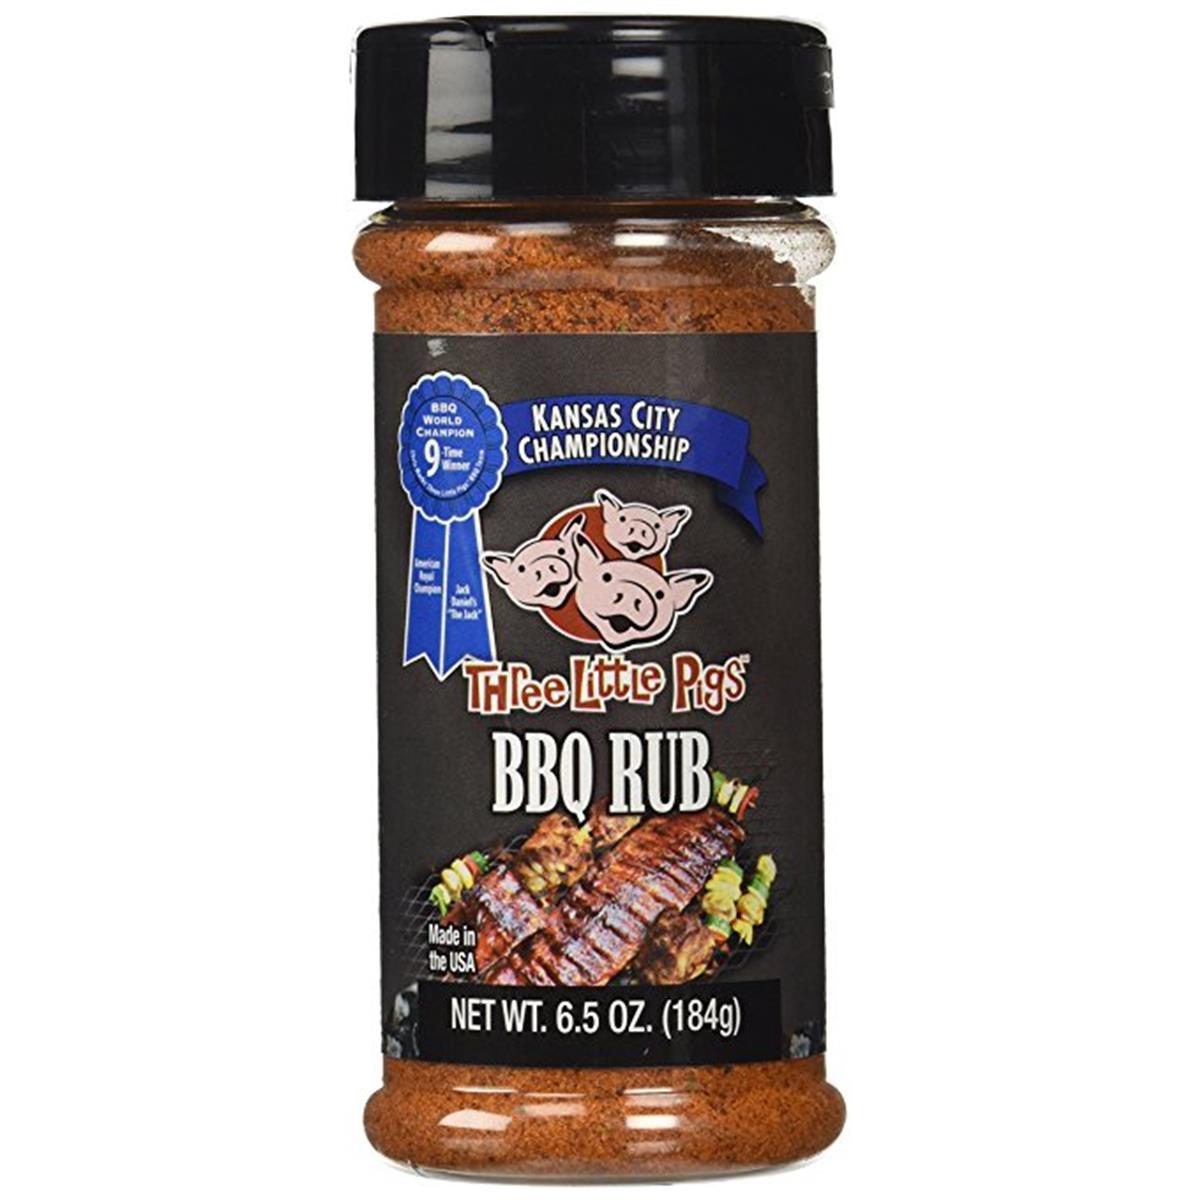 Picture of Old World Spices &amp; Seasonings 8393431 6.5 oz Three Little Pigs Barbecue Rub